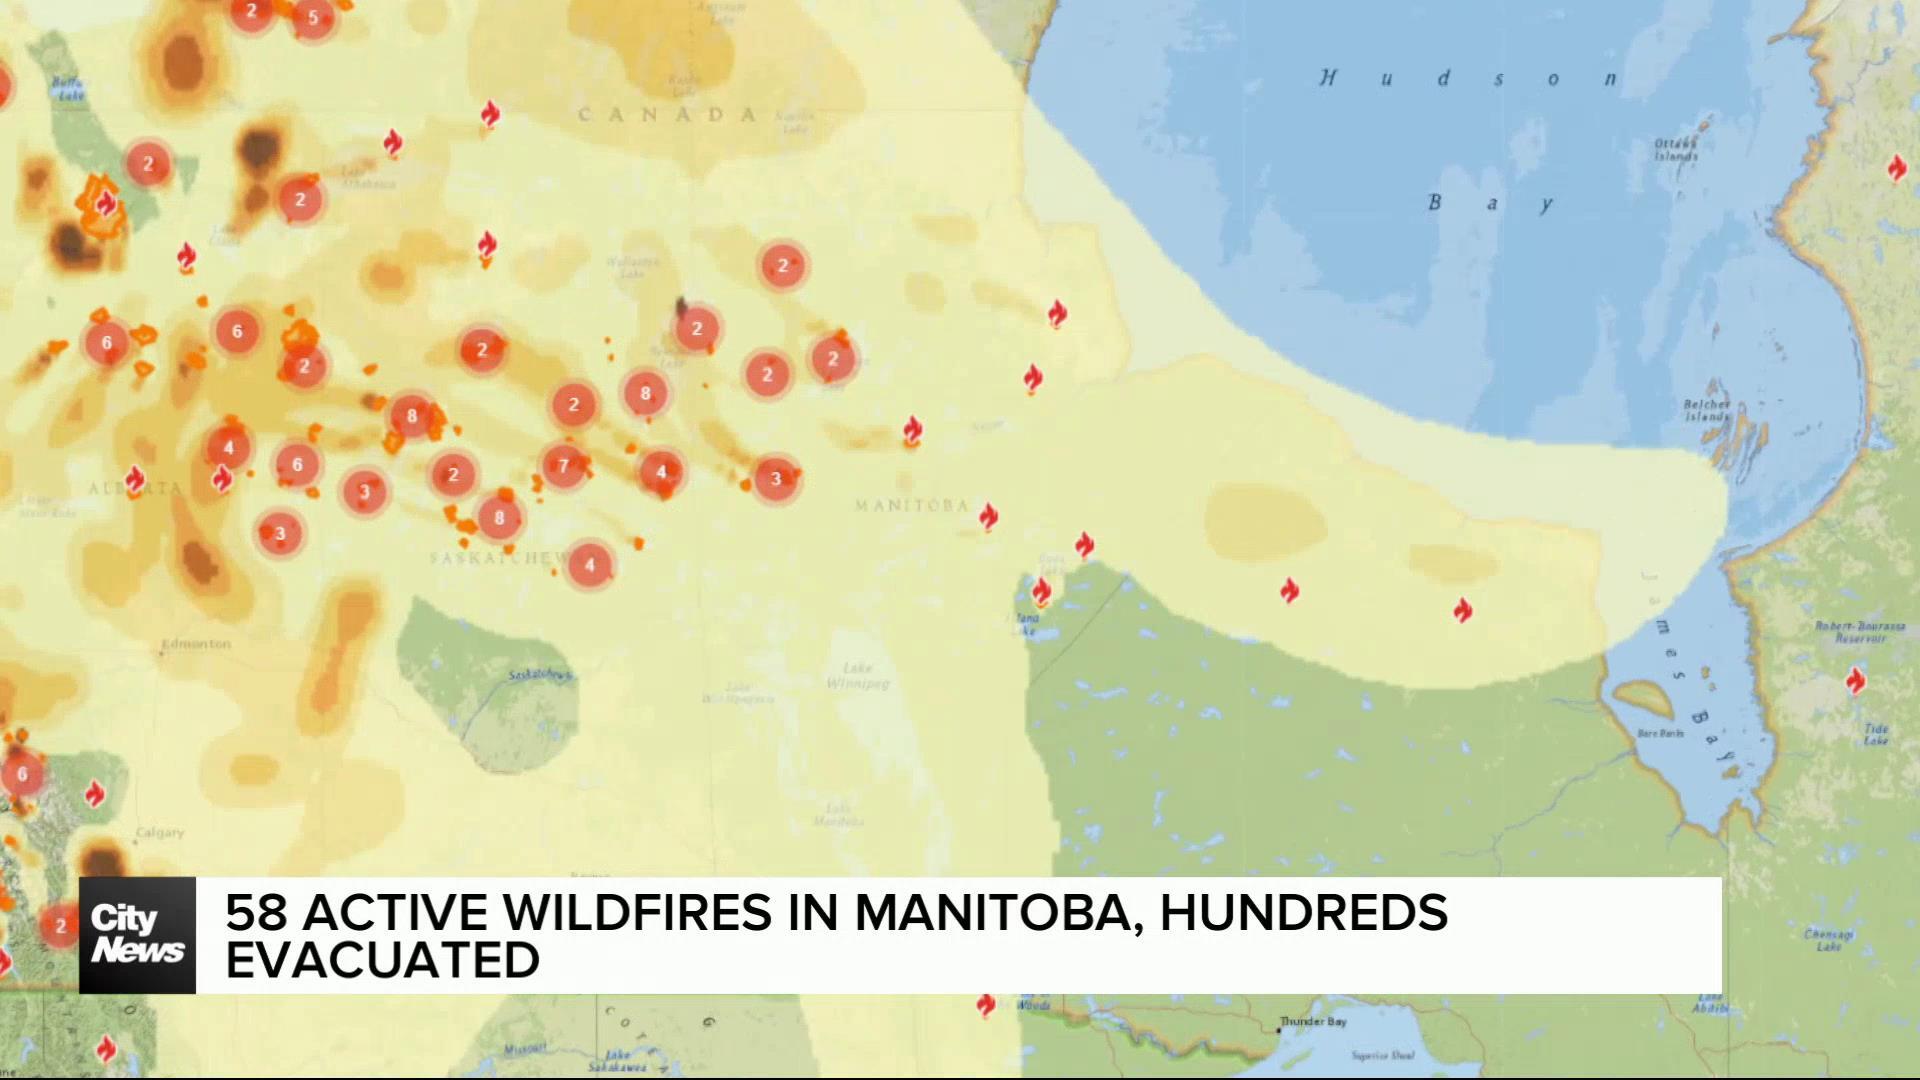 Dozens of wildfires spread across the country, as hundreds are evacuated in Manitoba